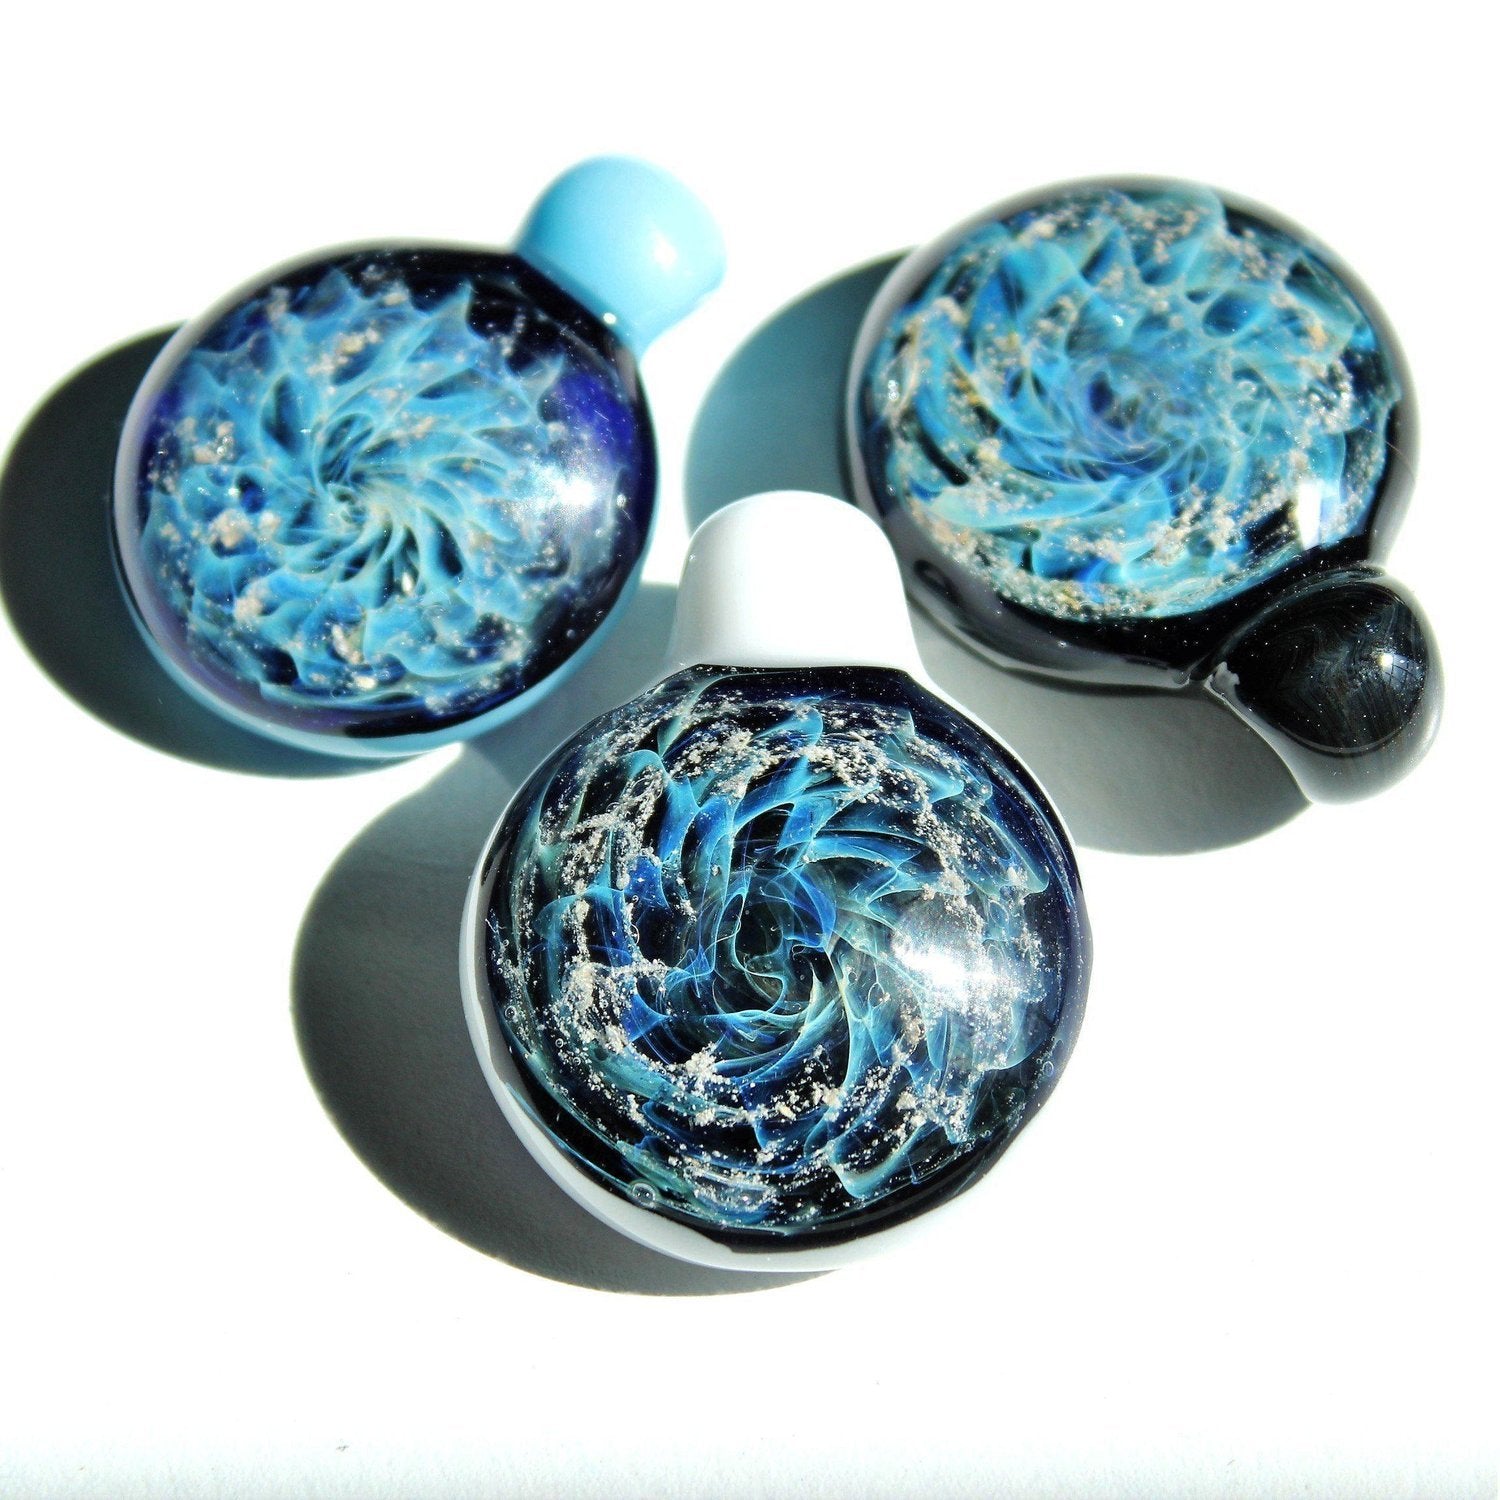 Galaxy Mini Glass Cremation Pendant Infused with Ashes